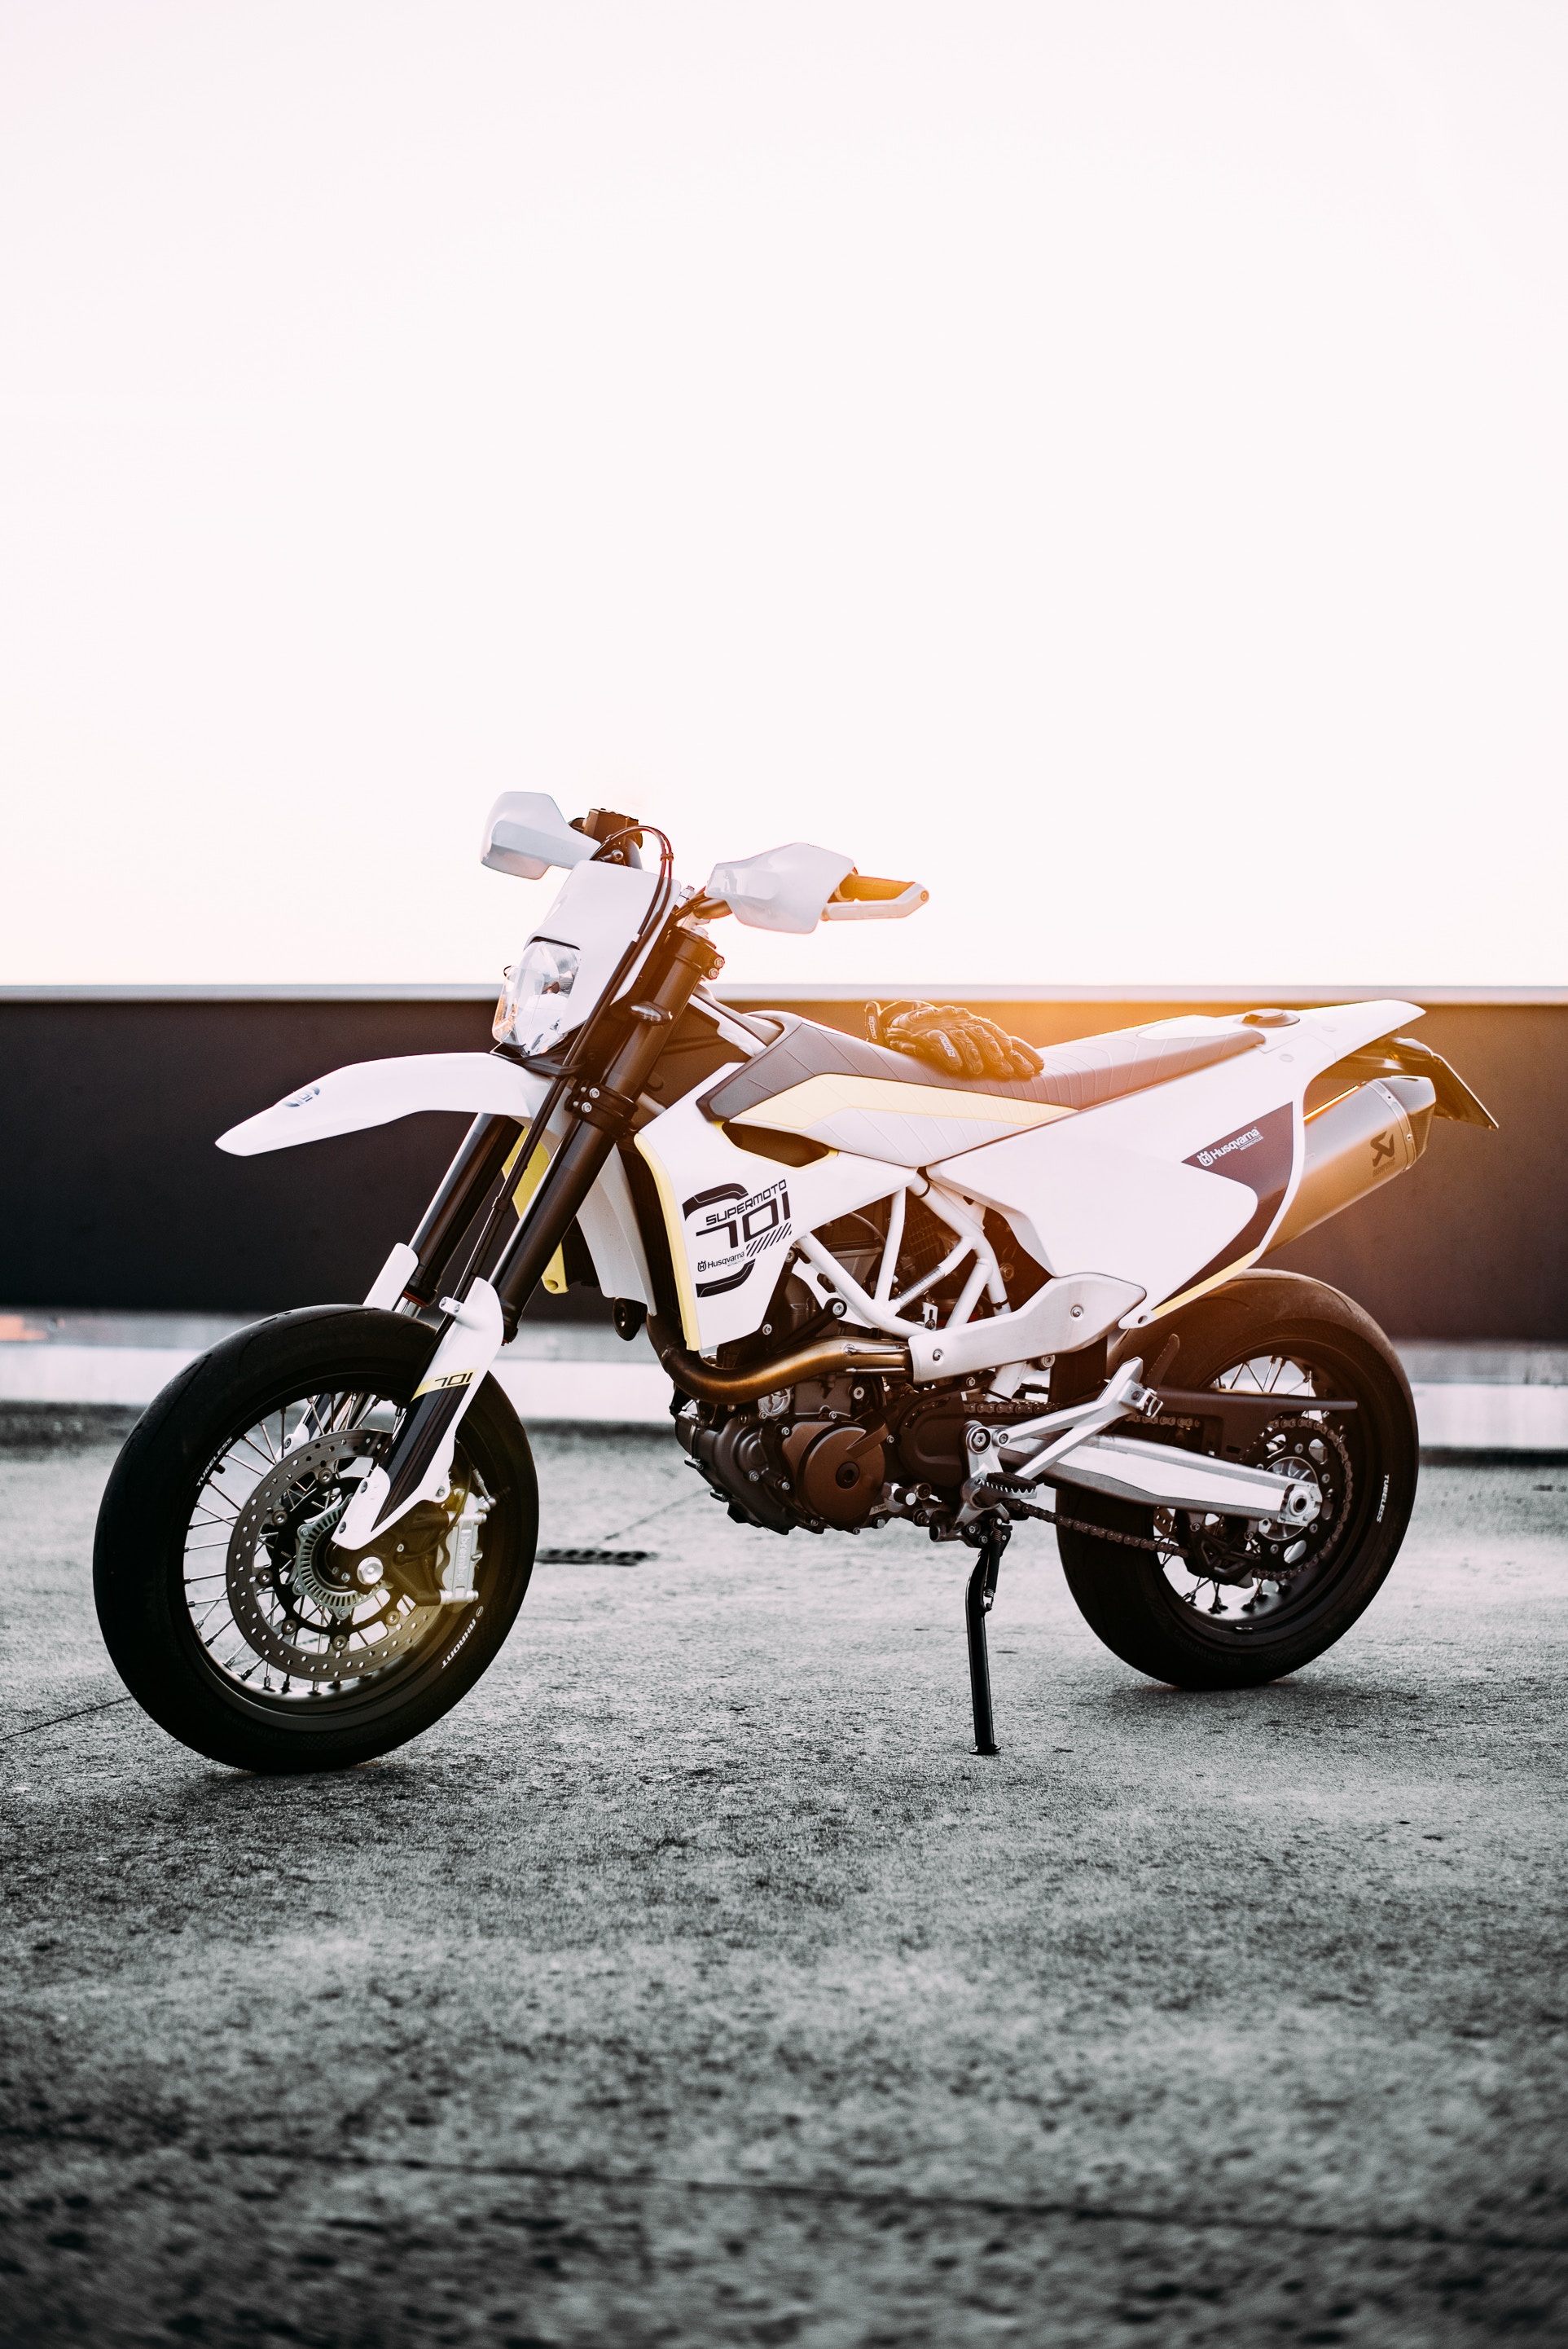 side view, motorcycles, white, motorcycle Free Stock Photo